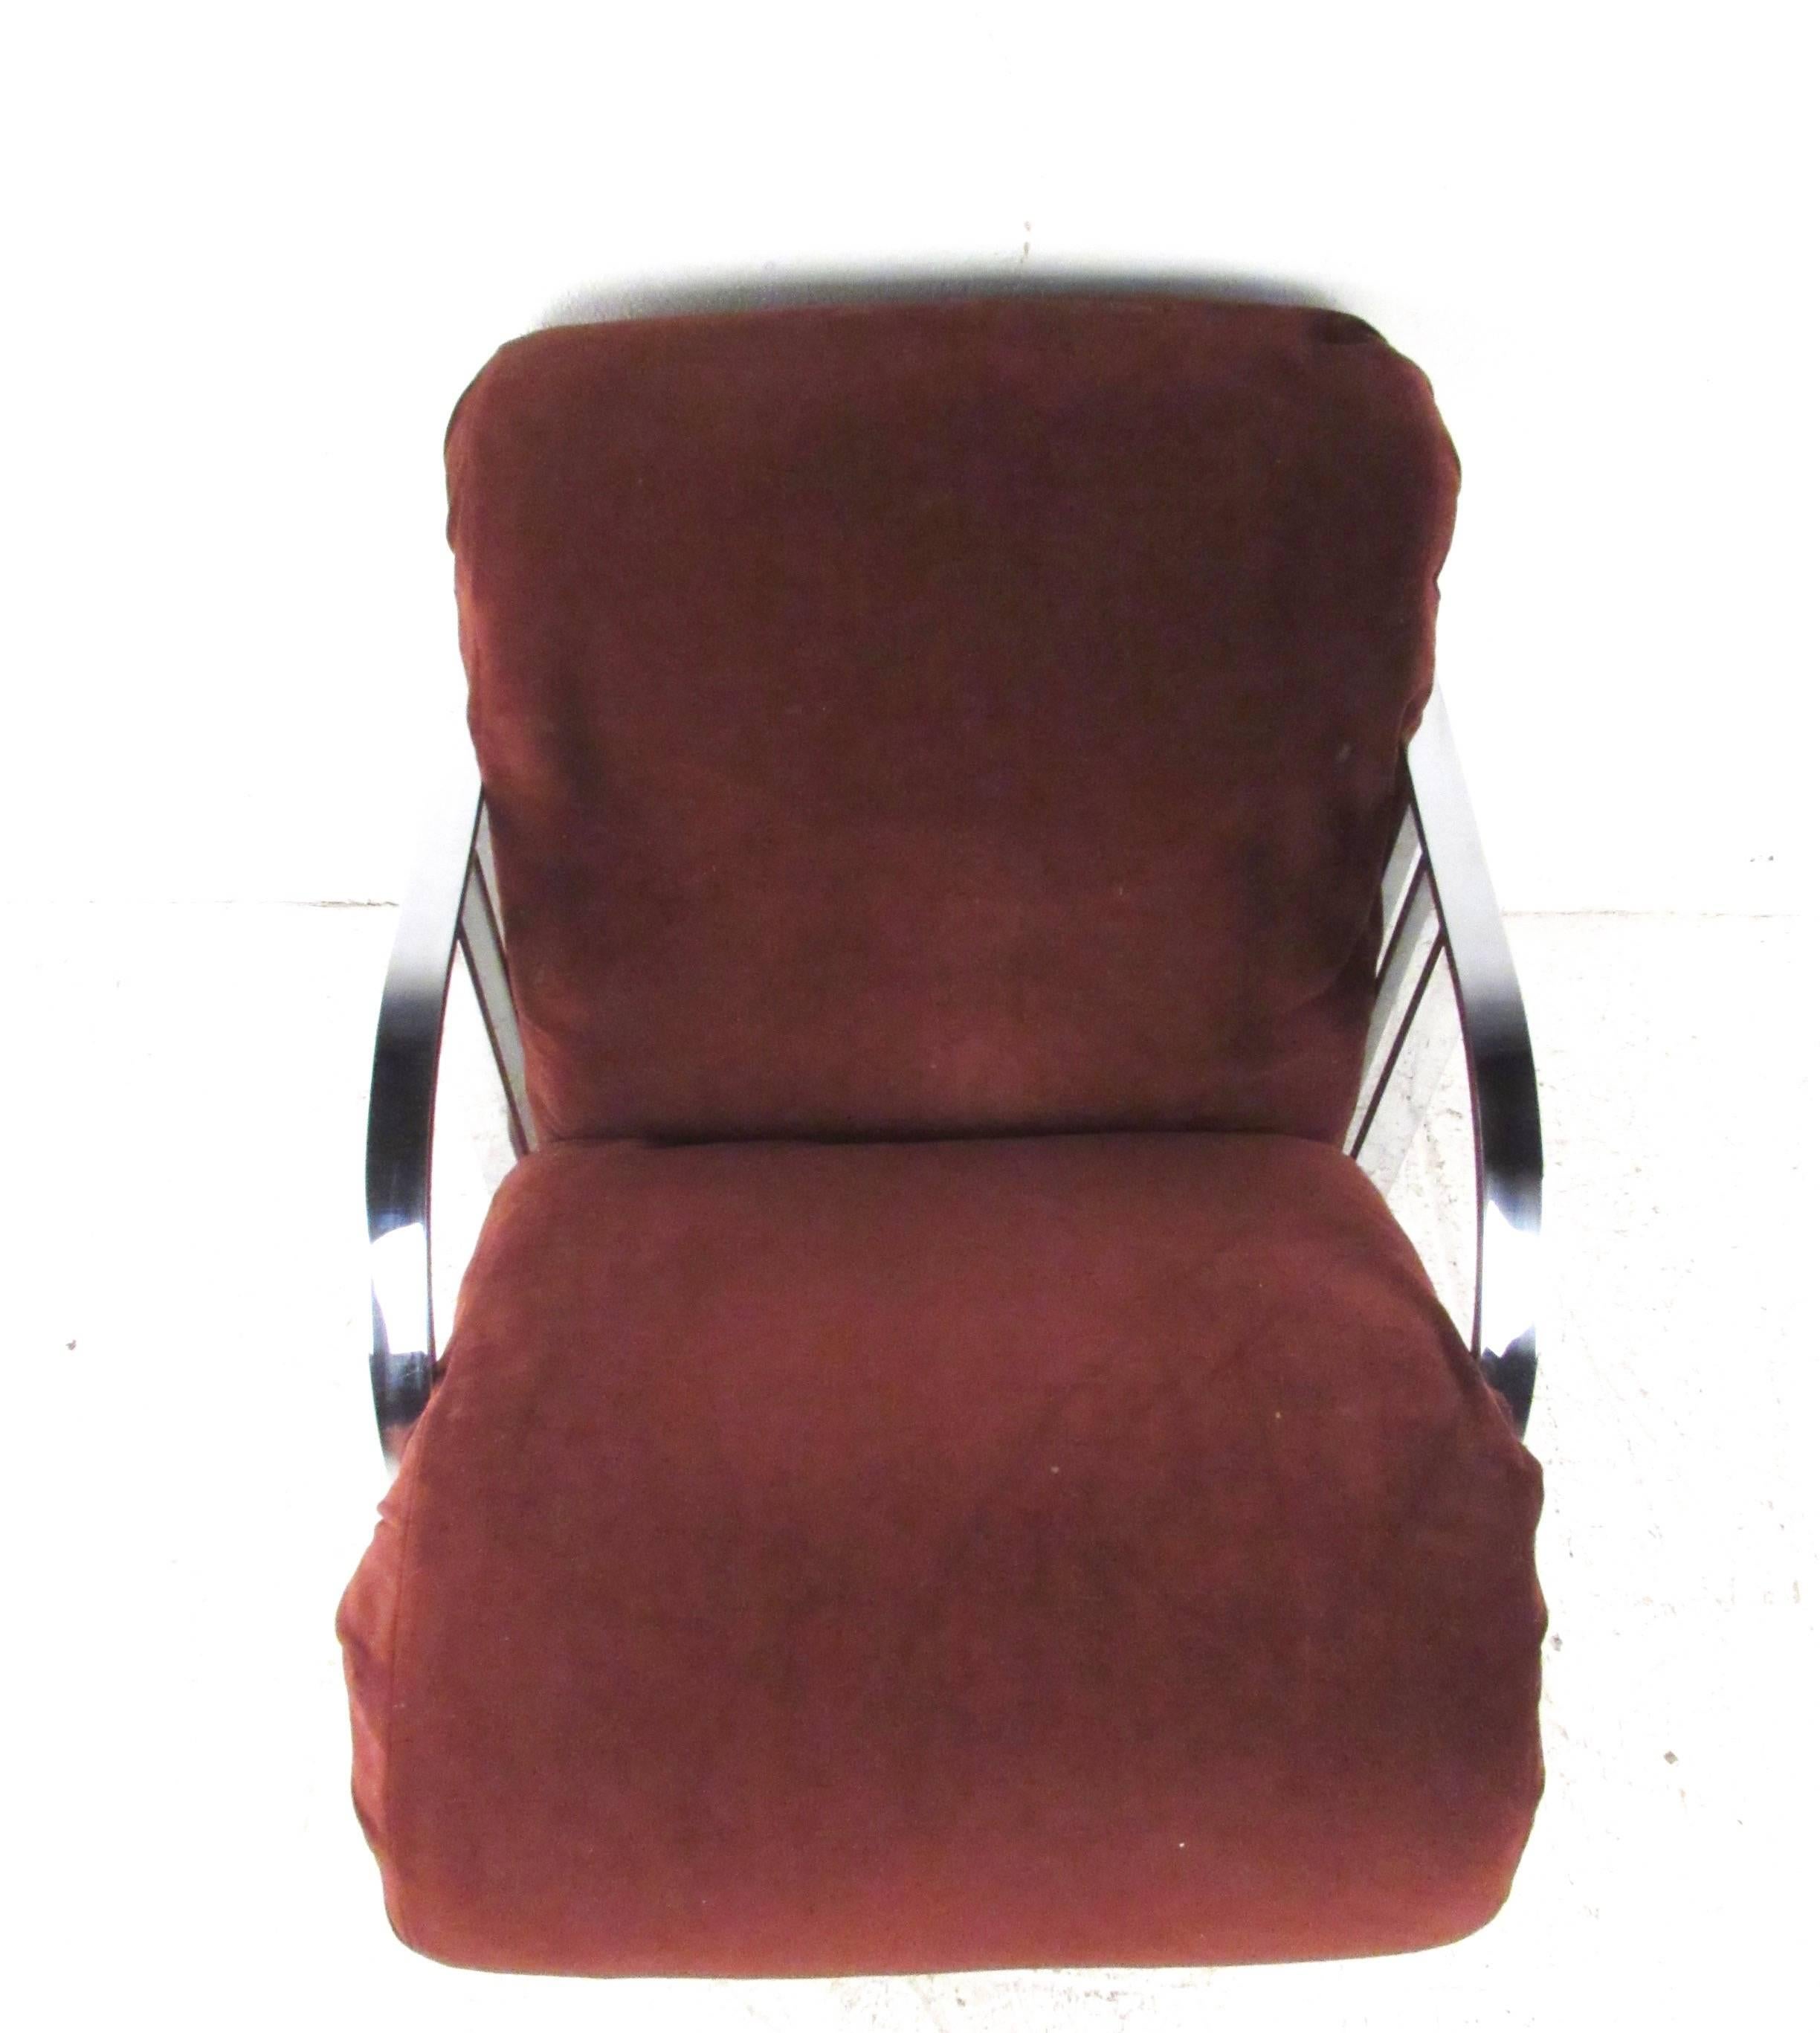 This unique low profile lounge chair features stylish Mid-Century chrome and a plush upholstered seat. The vintage modern mix of design and comfort seems to have been inspired by Mid-Century master Milo Baughman. Please confirm item location (NY or